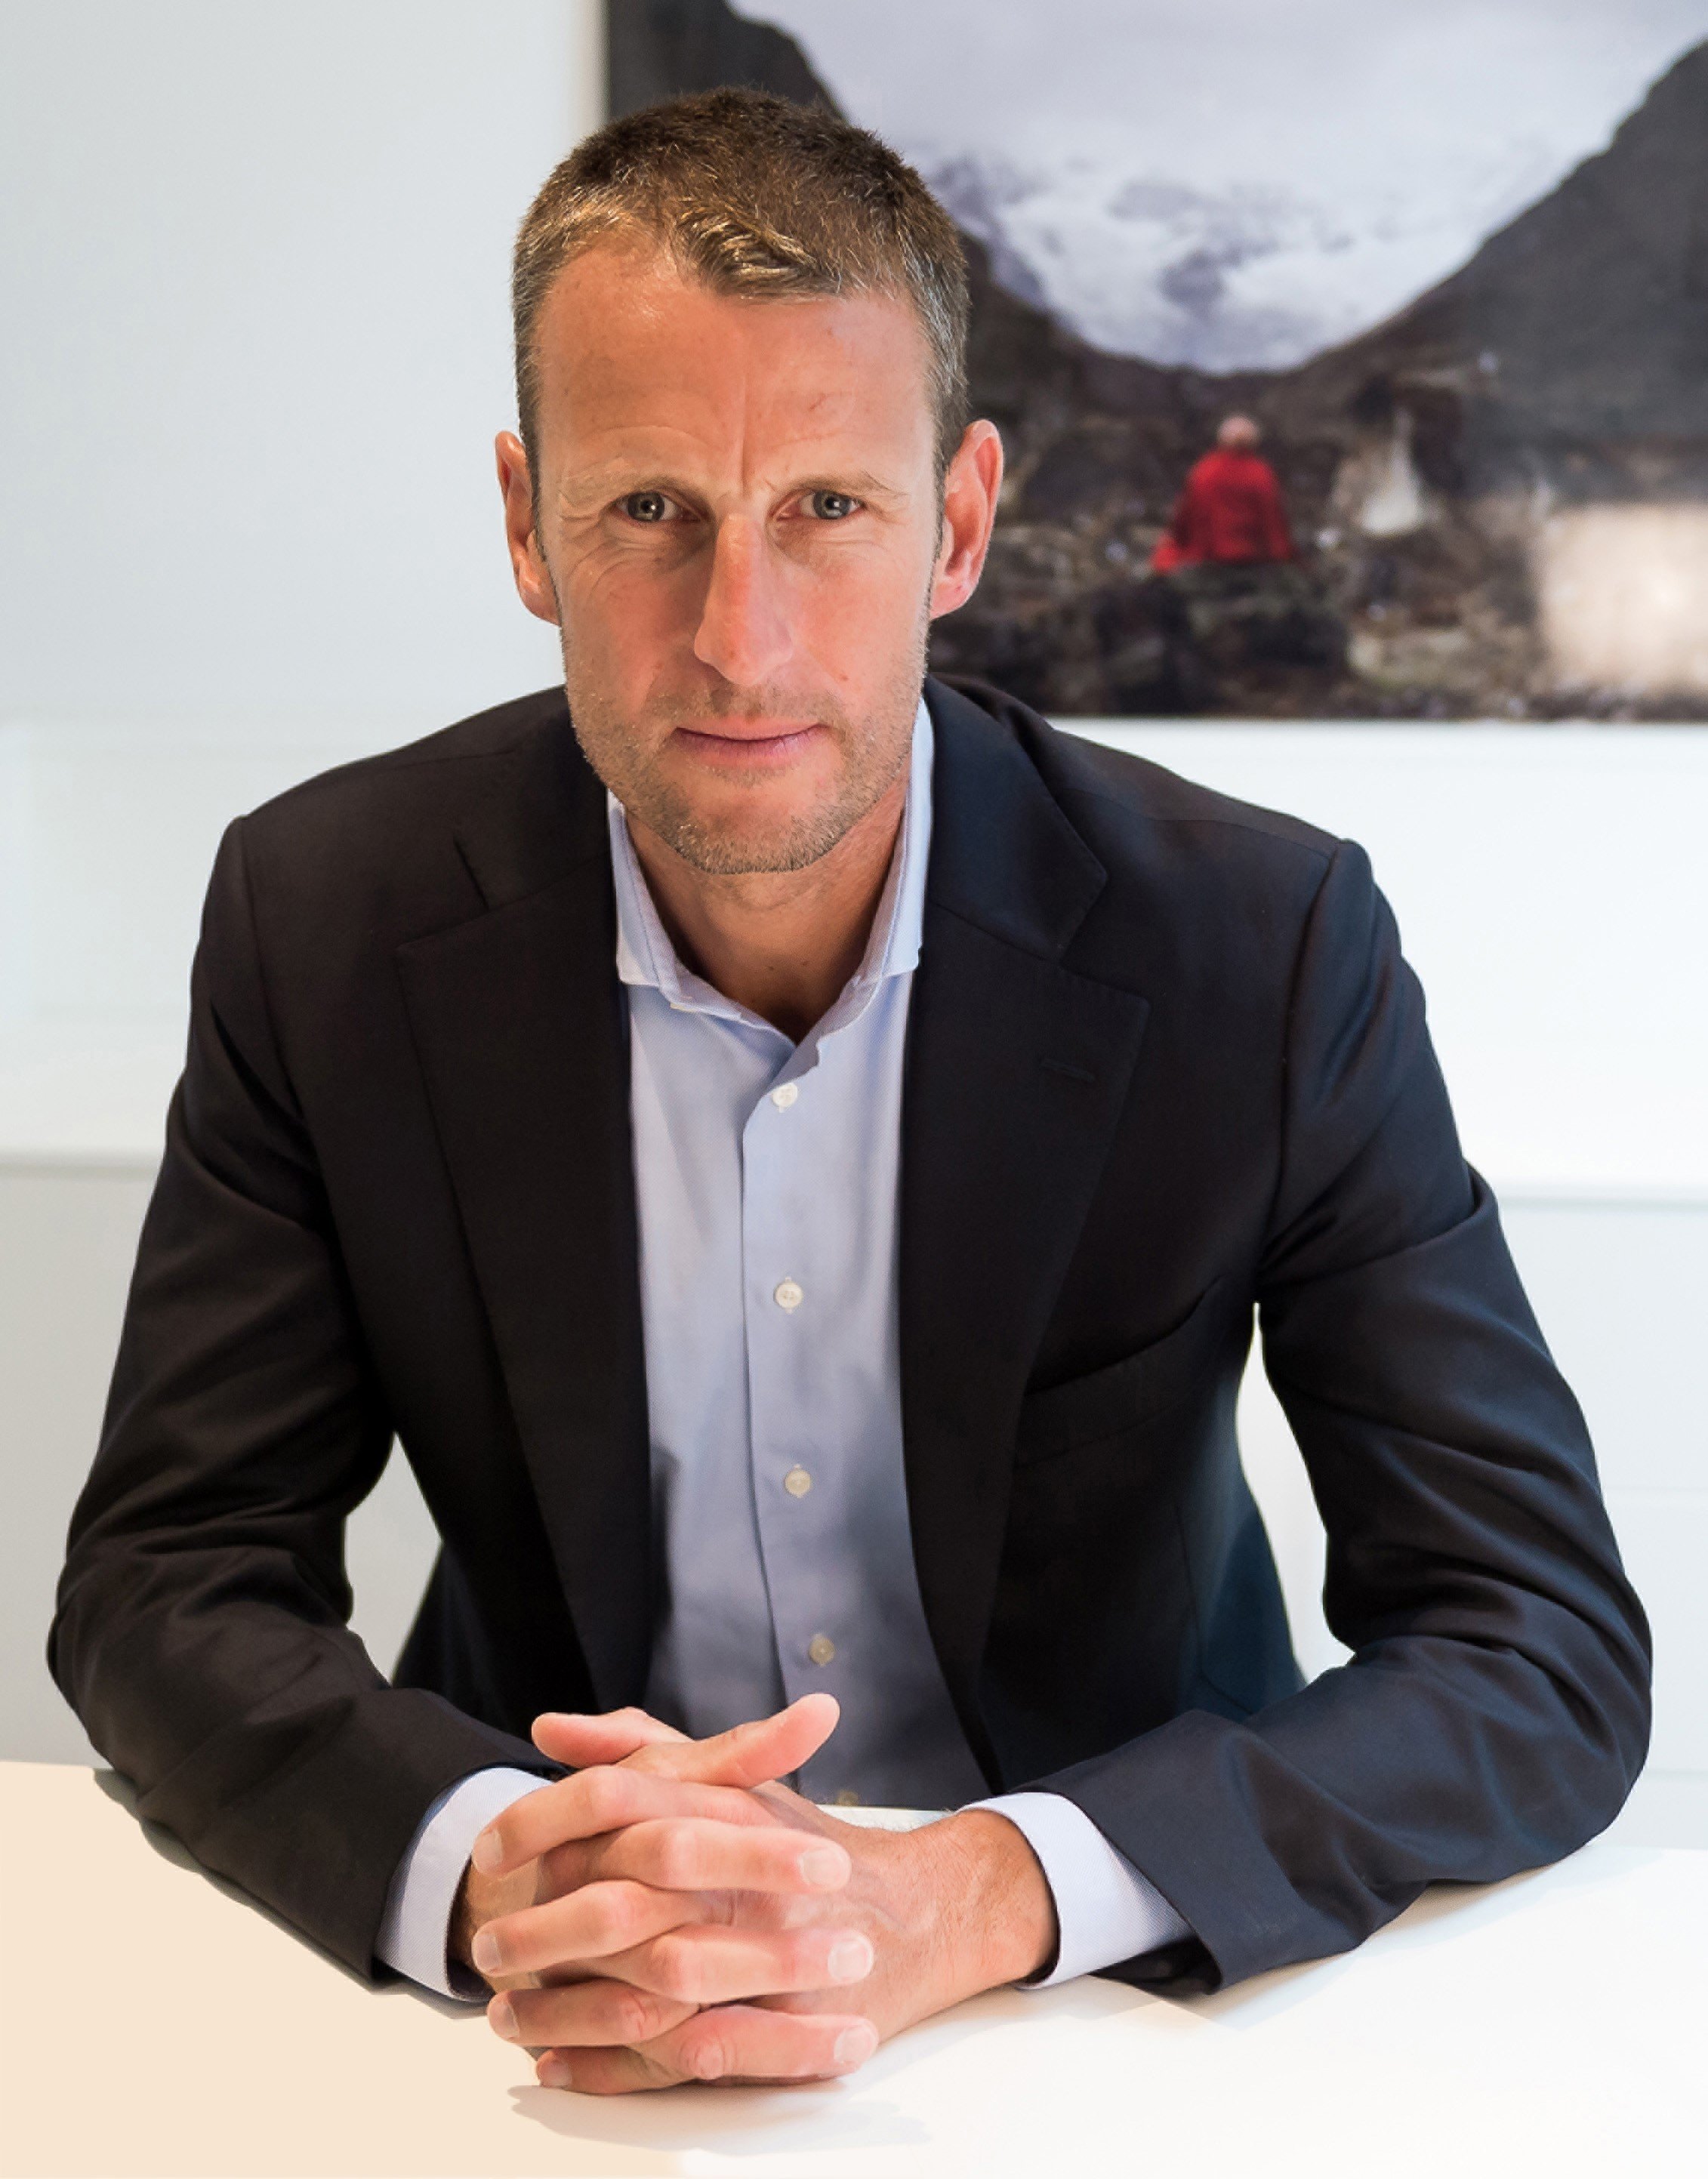 Patrick Pruniaux has been appointed the new CEO of Ulysse Nardin.